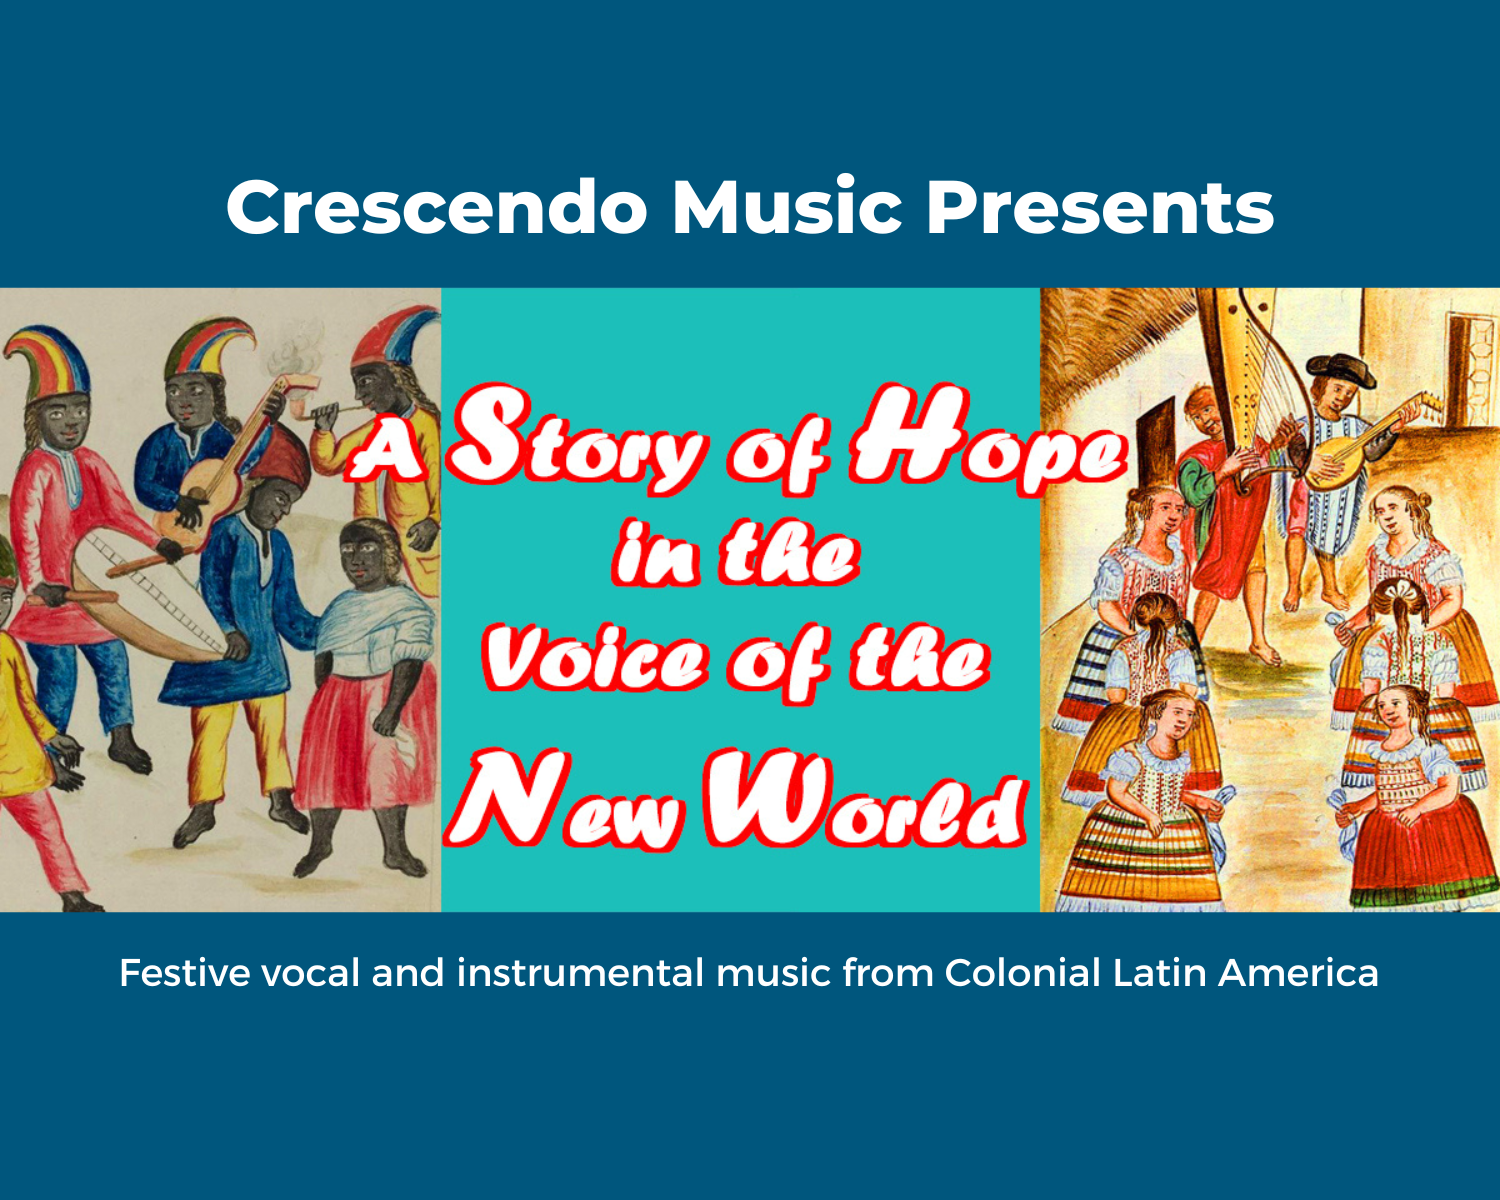 Crescendo Music: A Story of Hope in the Voice of the New World